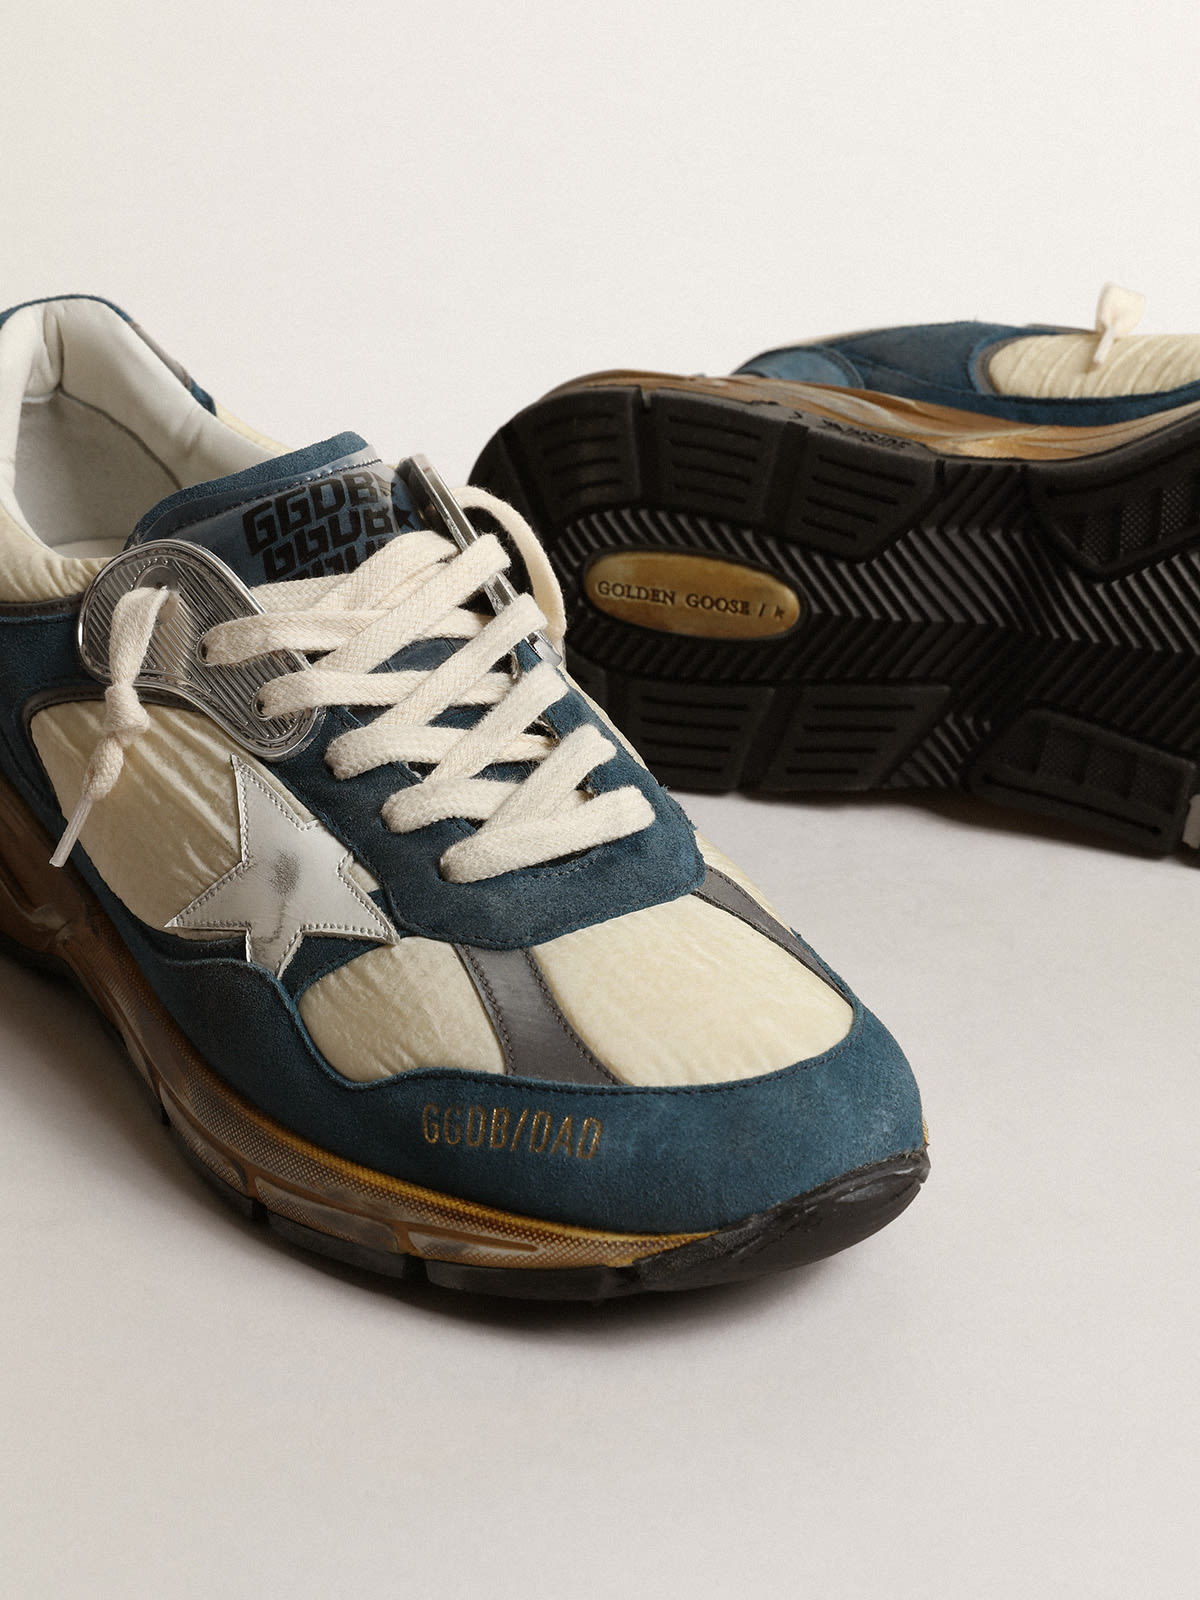 Golden Goose - Men’s Dad-Star in petrol-blue suede with white leather star in 